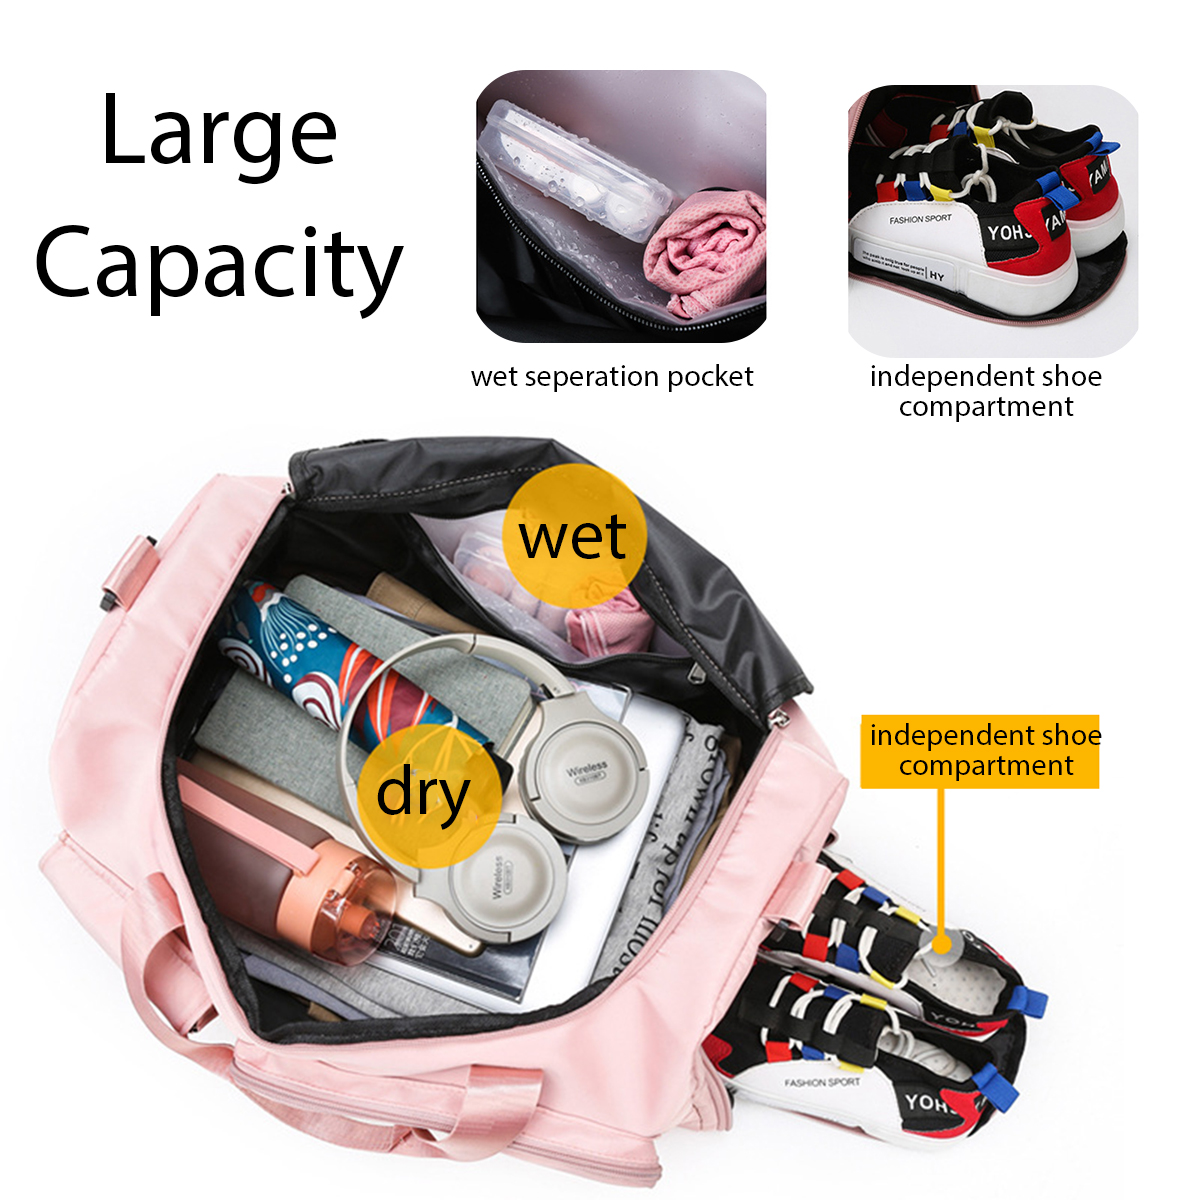 20-Waterproof-Outdoor-Travel-Bag-Large-Capacity-with-Shoes-Compartment-Storage-Bag-Short-Tour-Weeken-1854807-3